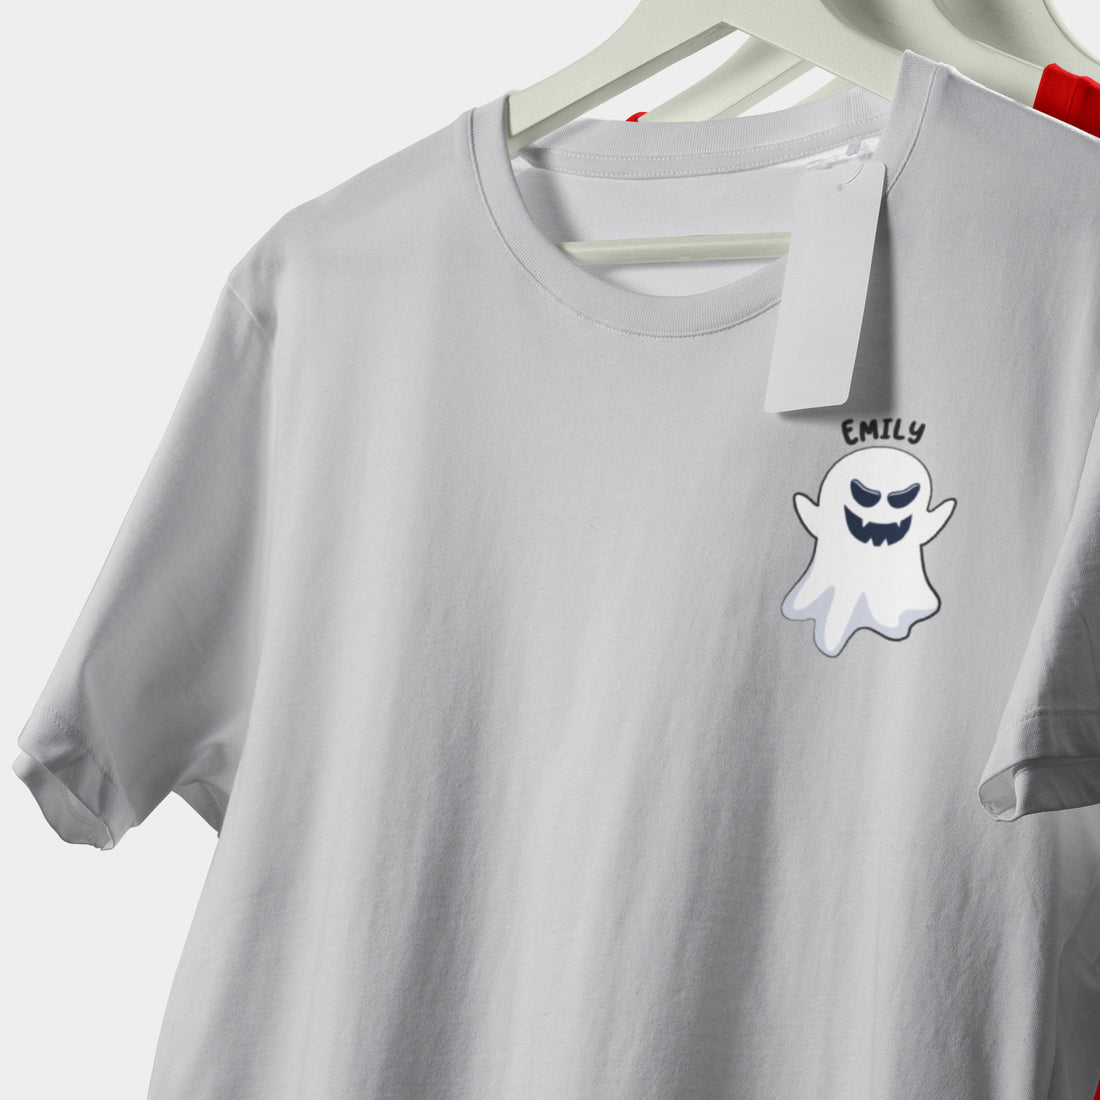 Personalized T-Shirt With Name And Ghost Cartoon